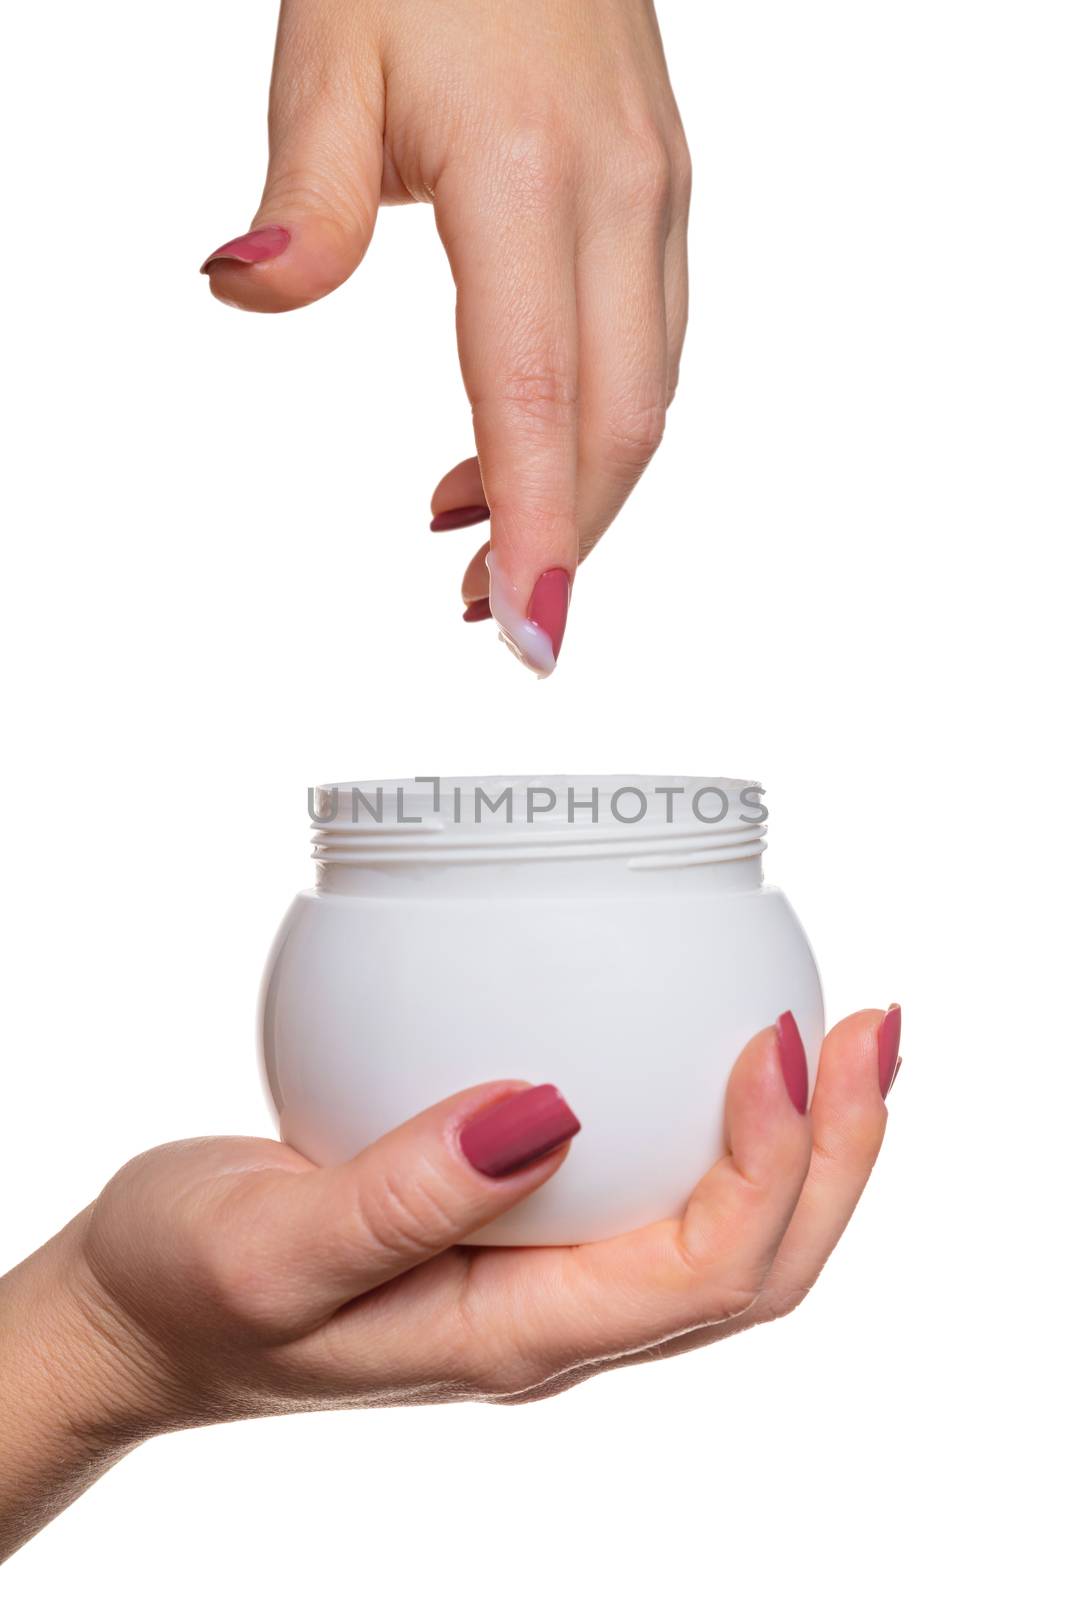 Hands with jar cosmetic cream on a white background